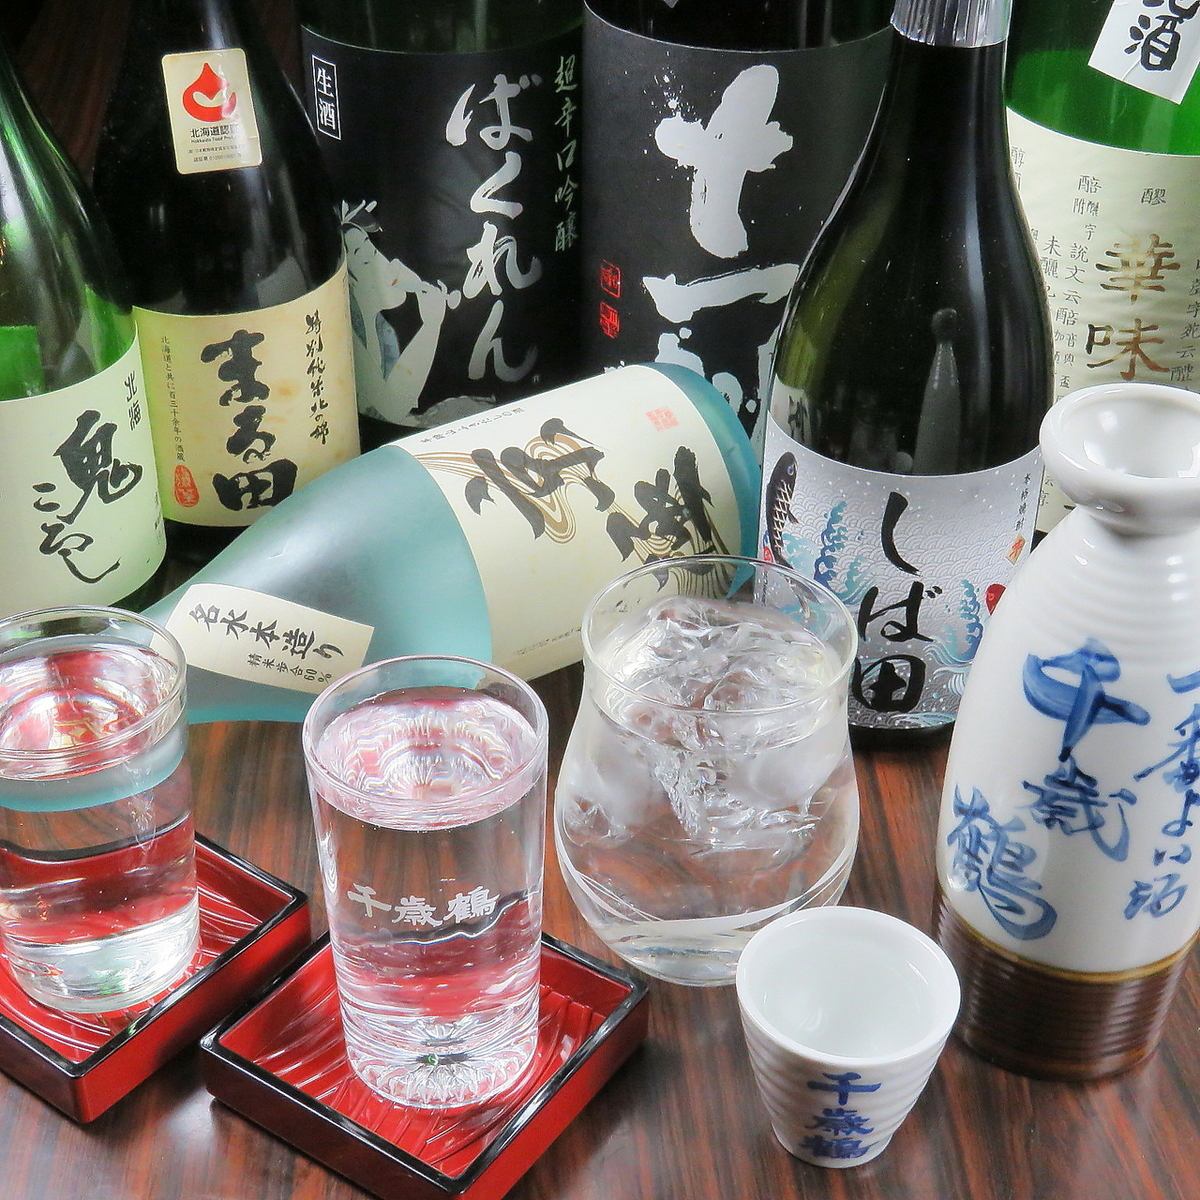 Enjoy a wide variety of local sake and Japanese sake, as well as fresh seafood delivered directly from Otaru fishing port.